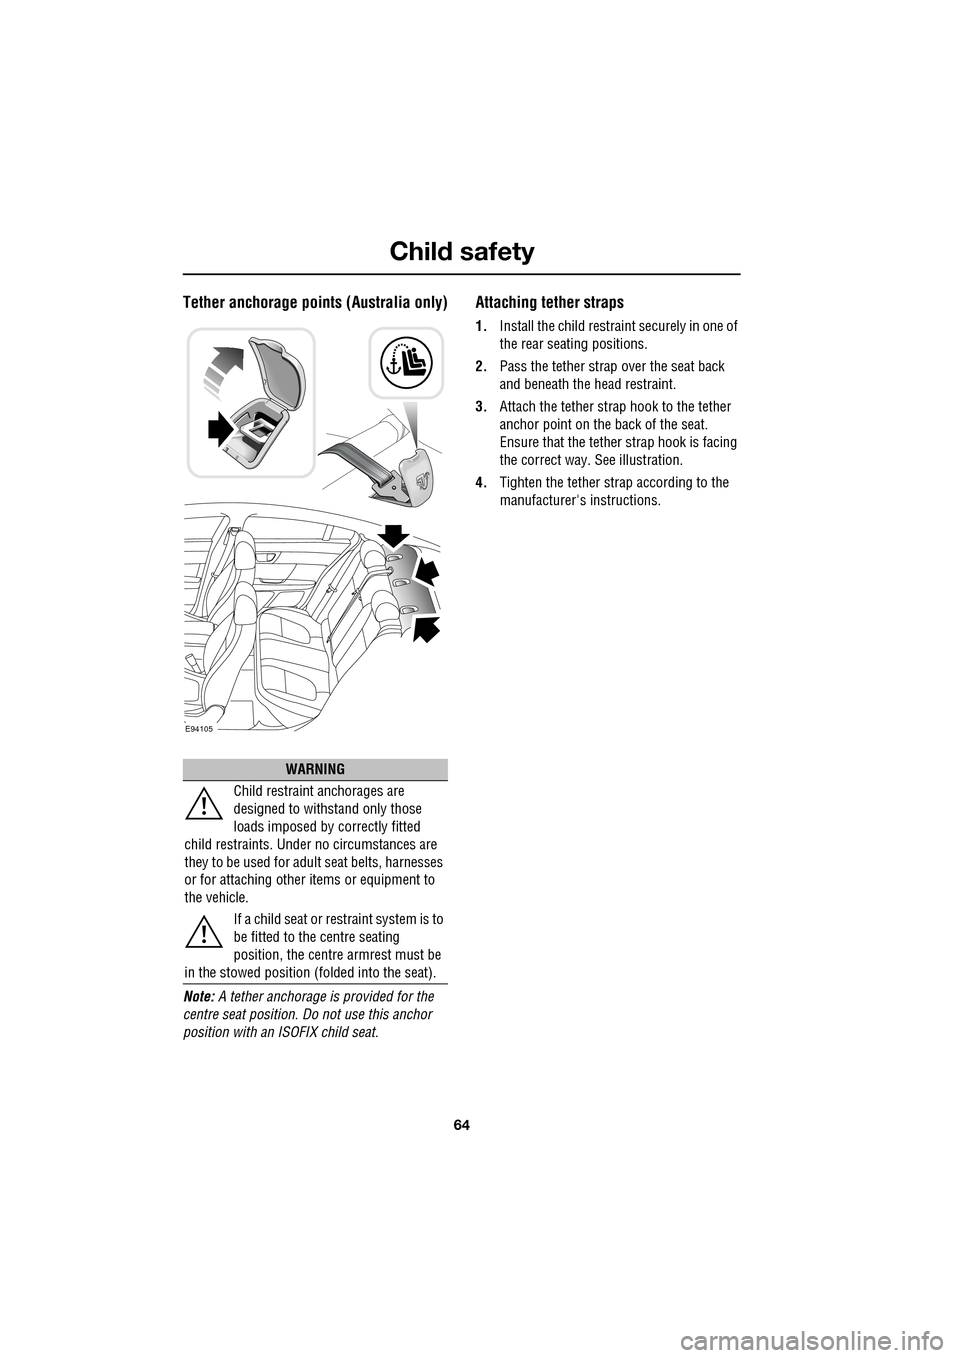 JAGUAR XF 2009 1.G Owners Manual Child safety
64
               
Tether anchorage points (Australia only)
Note: A tether anchorage is provided for the 
centre seat position. Do  not use this anchor 
position with an ISOFIX child seat